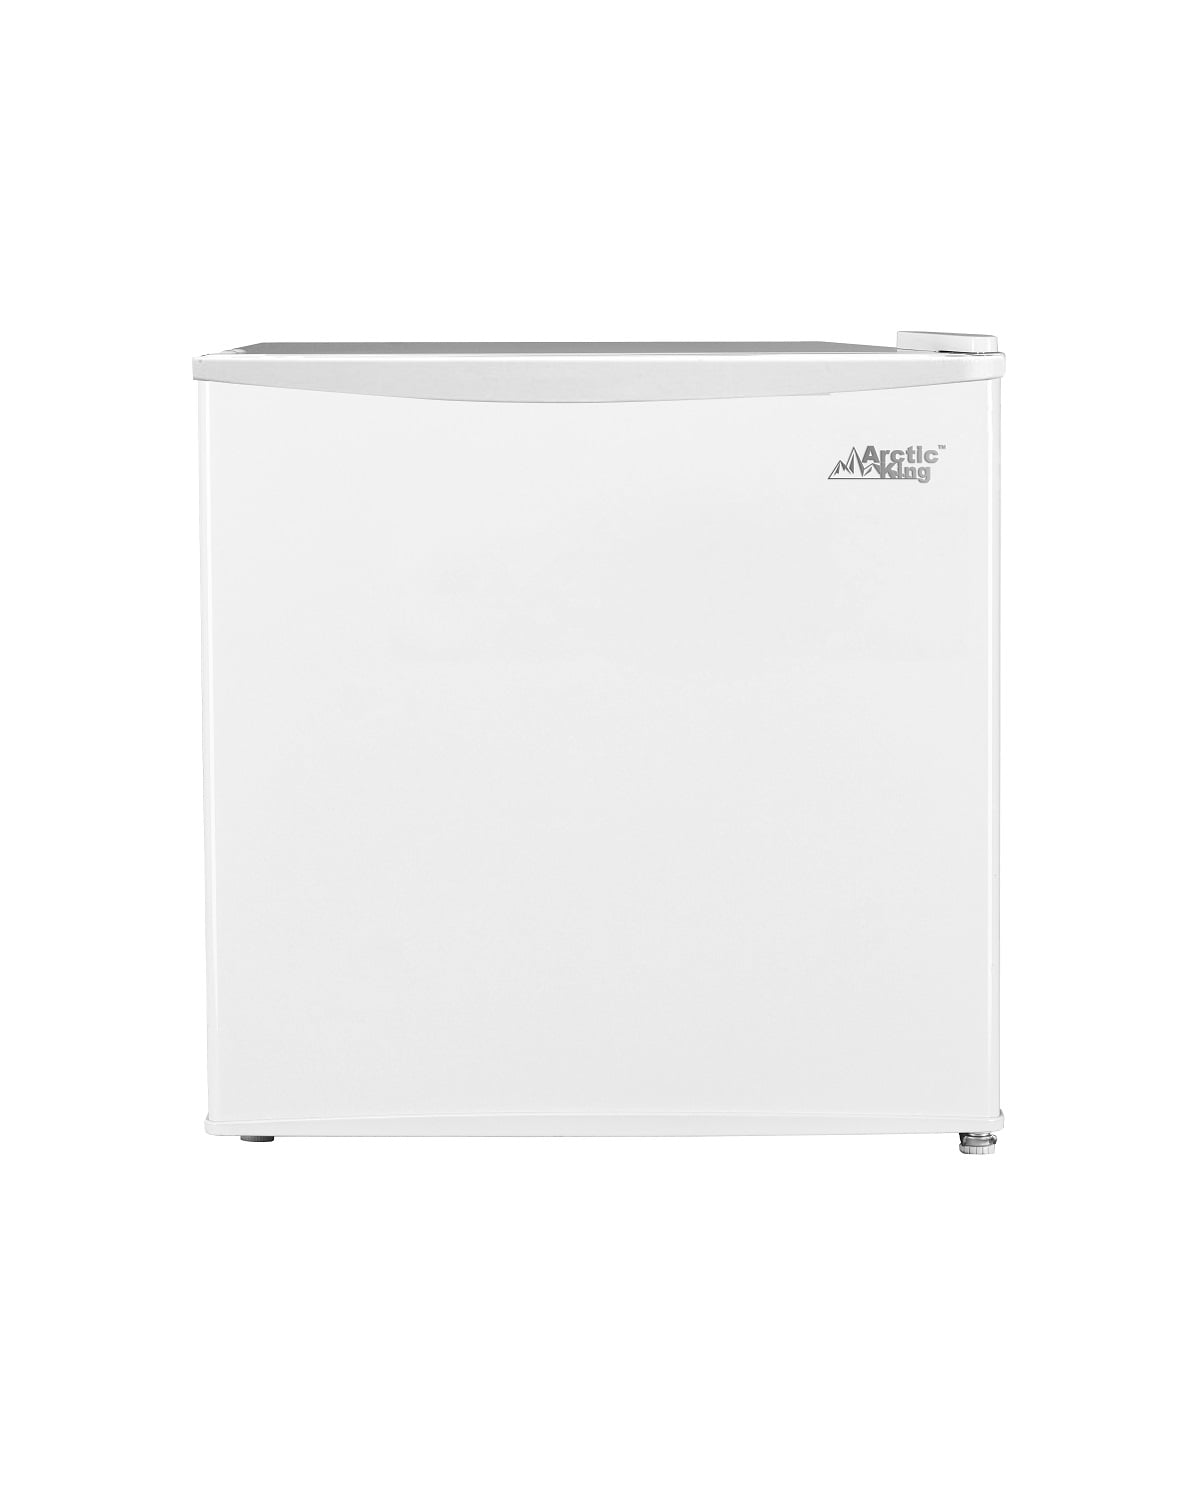 Arctic King 7 cu.ft Chest Freezer Black ✅✅FAST SHIPPING ✅✅ ✅CHEAPEST PRICE ‼️‼️